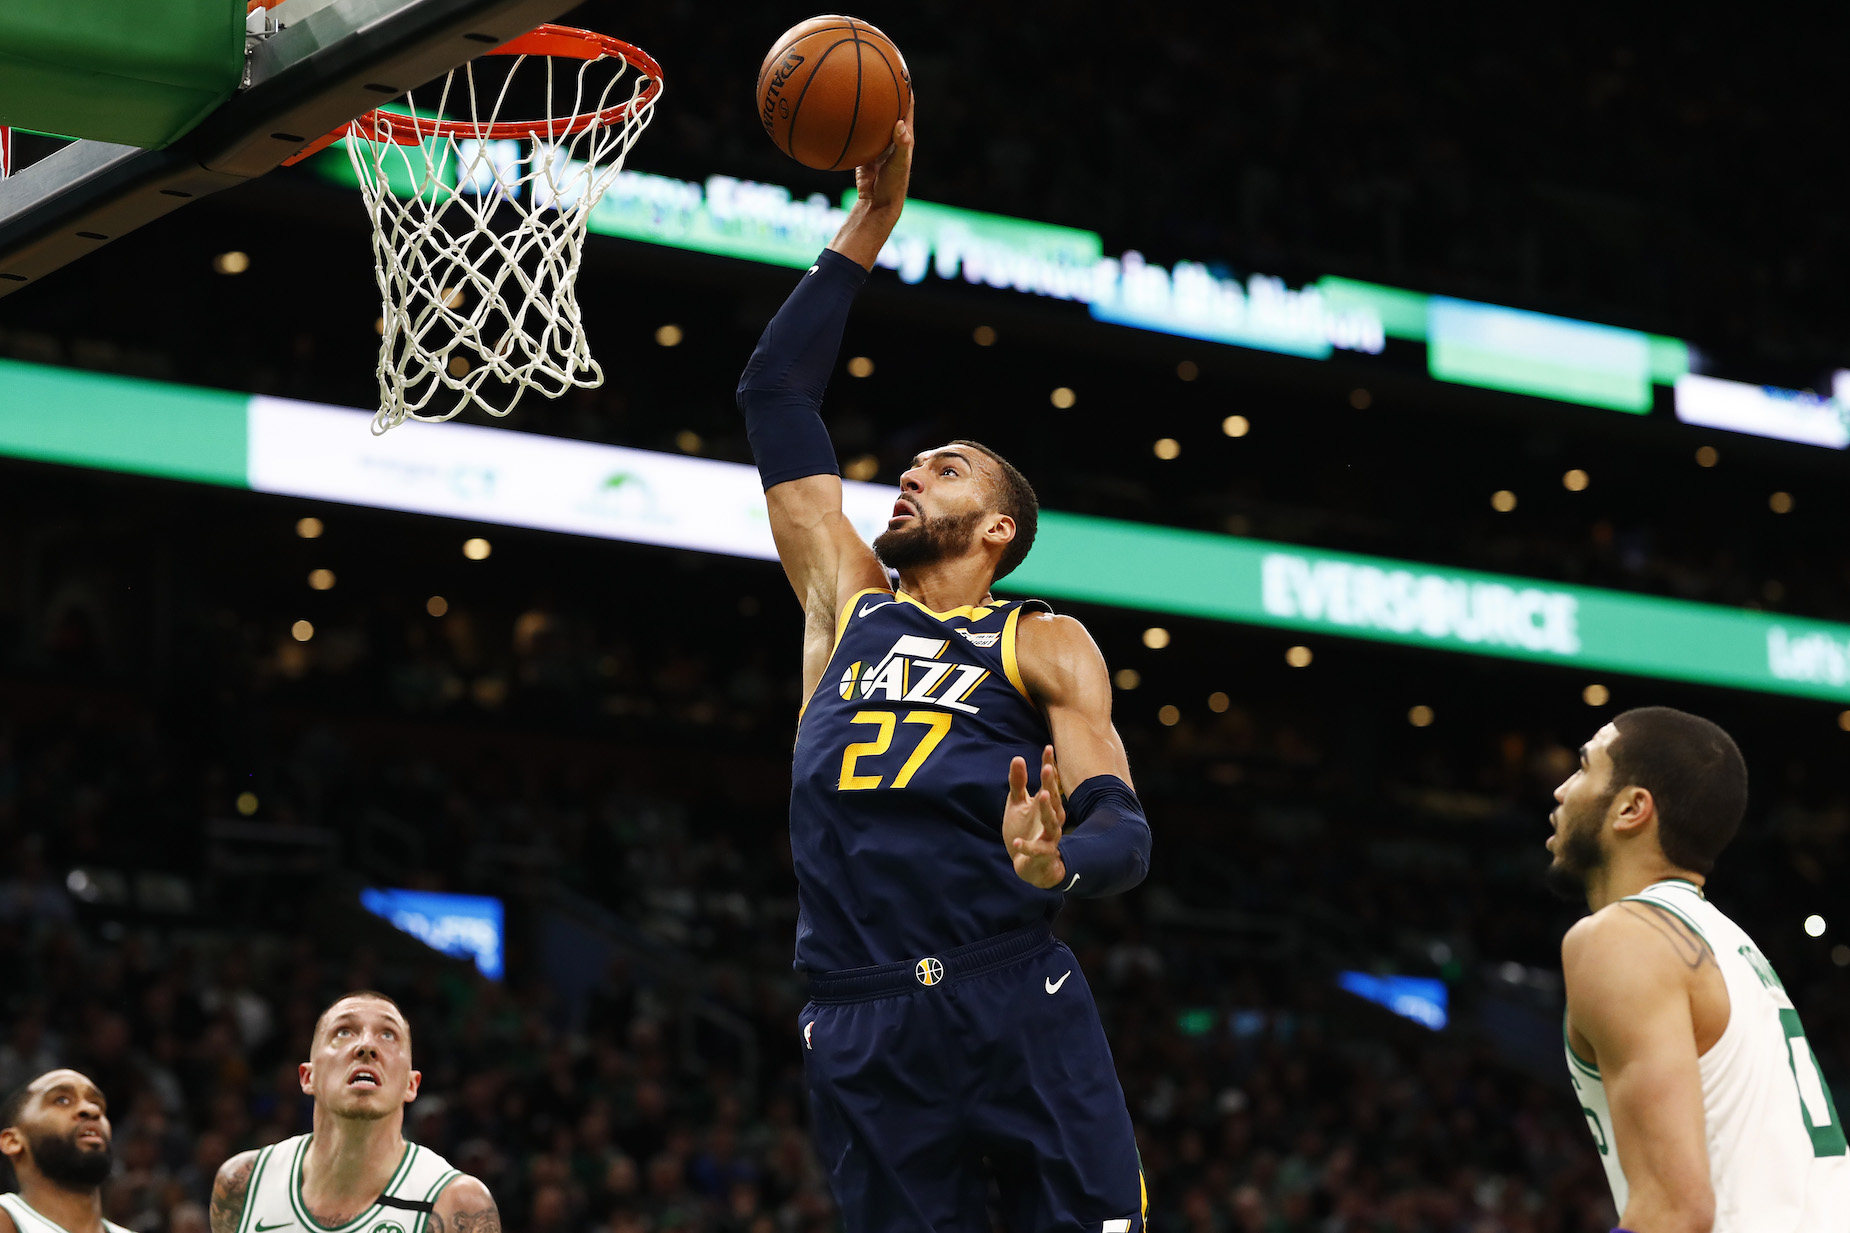 Rudy Gobert's COVID-19 diagnosis could have saved countless lives.